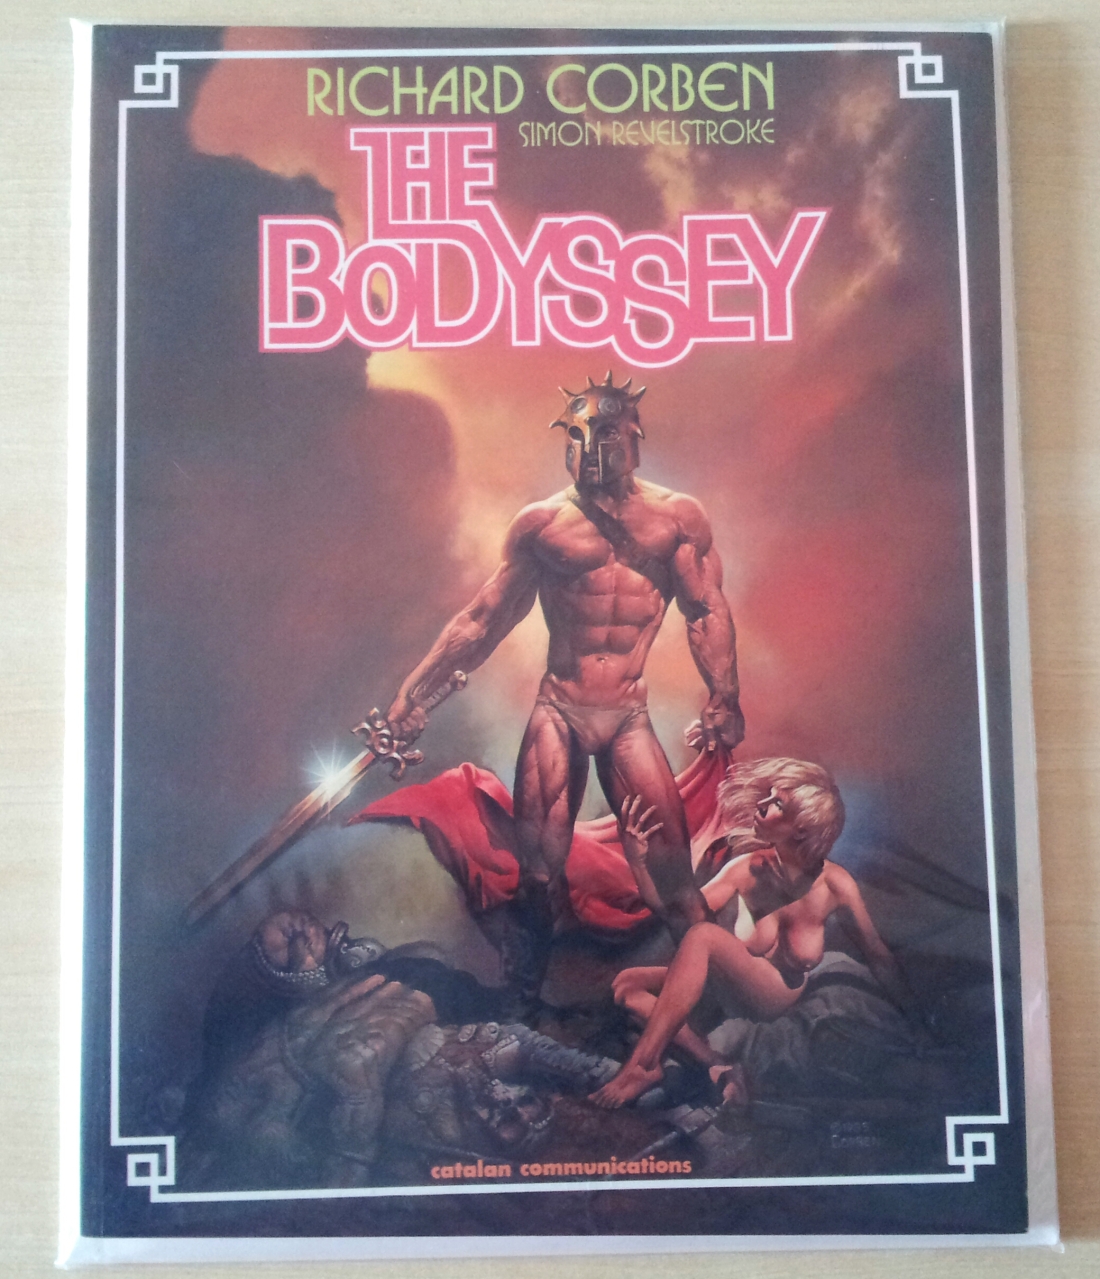 THE BODYSSEY BY RICHARD CORBEN - REVIEW